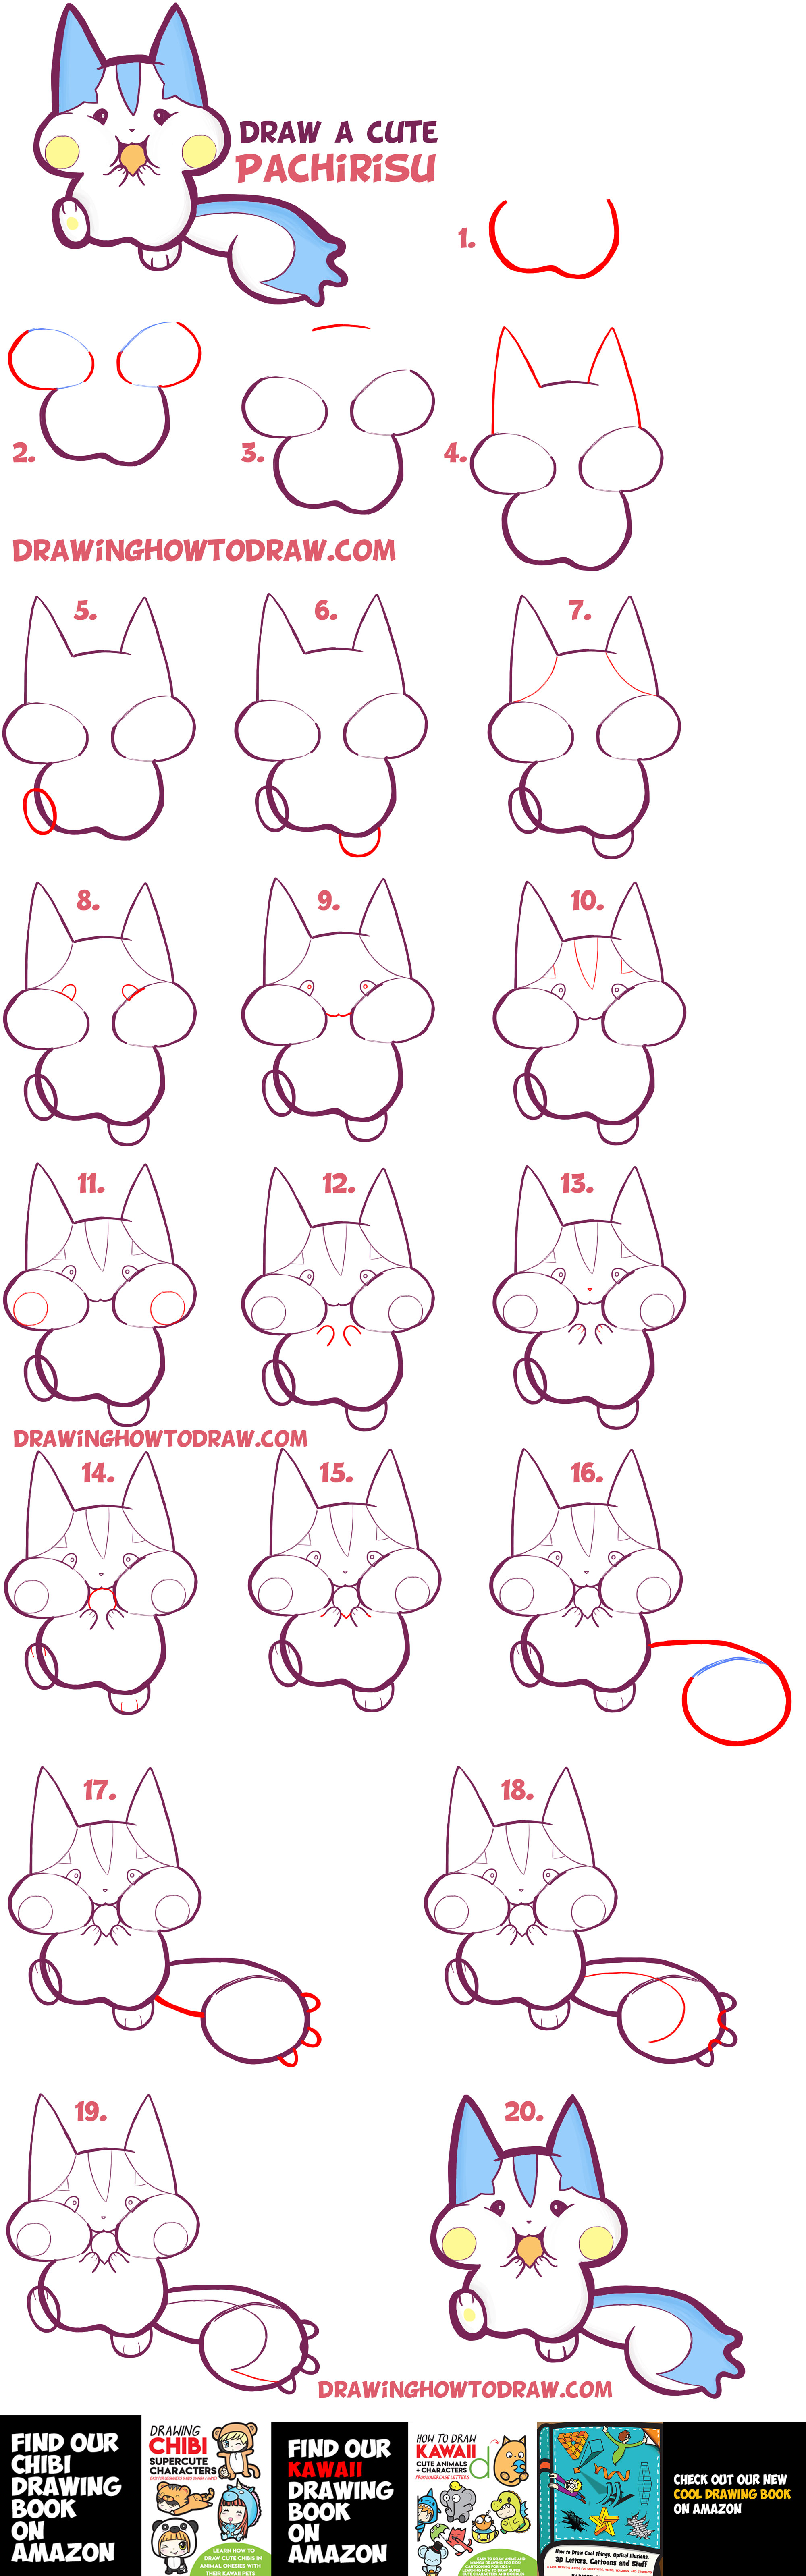 Learn How to Draw Kawaii / Chibi Pachirisu Pokemon with Simple Steps Drawing Lesson for Kids & Beginners